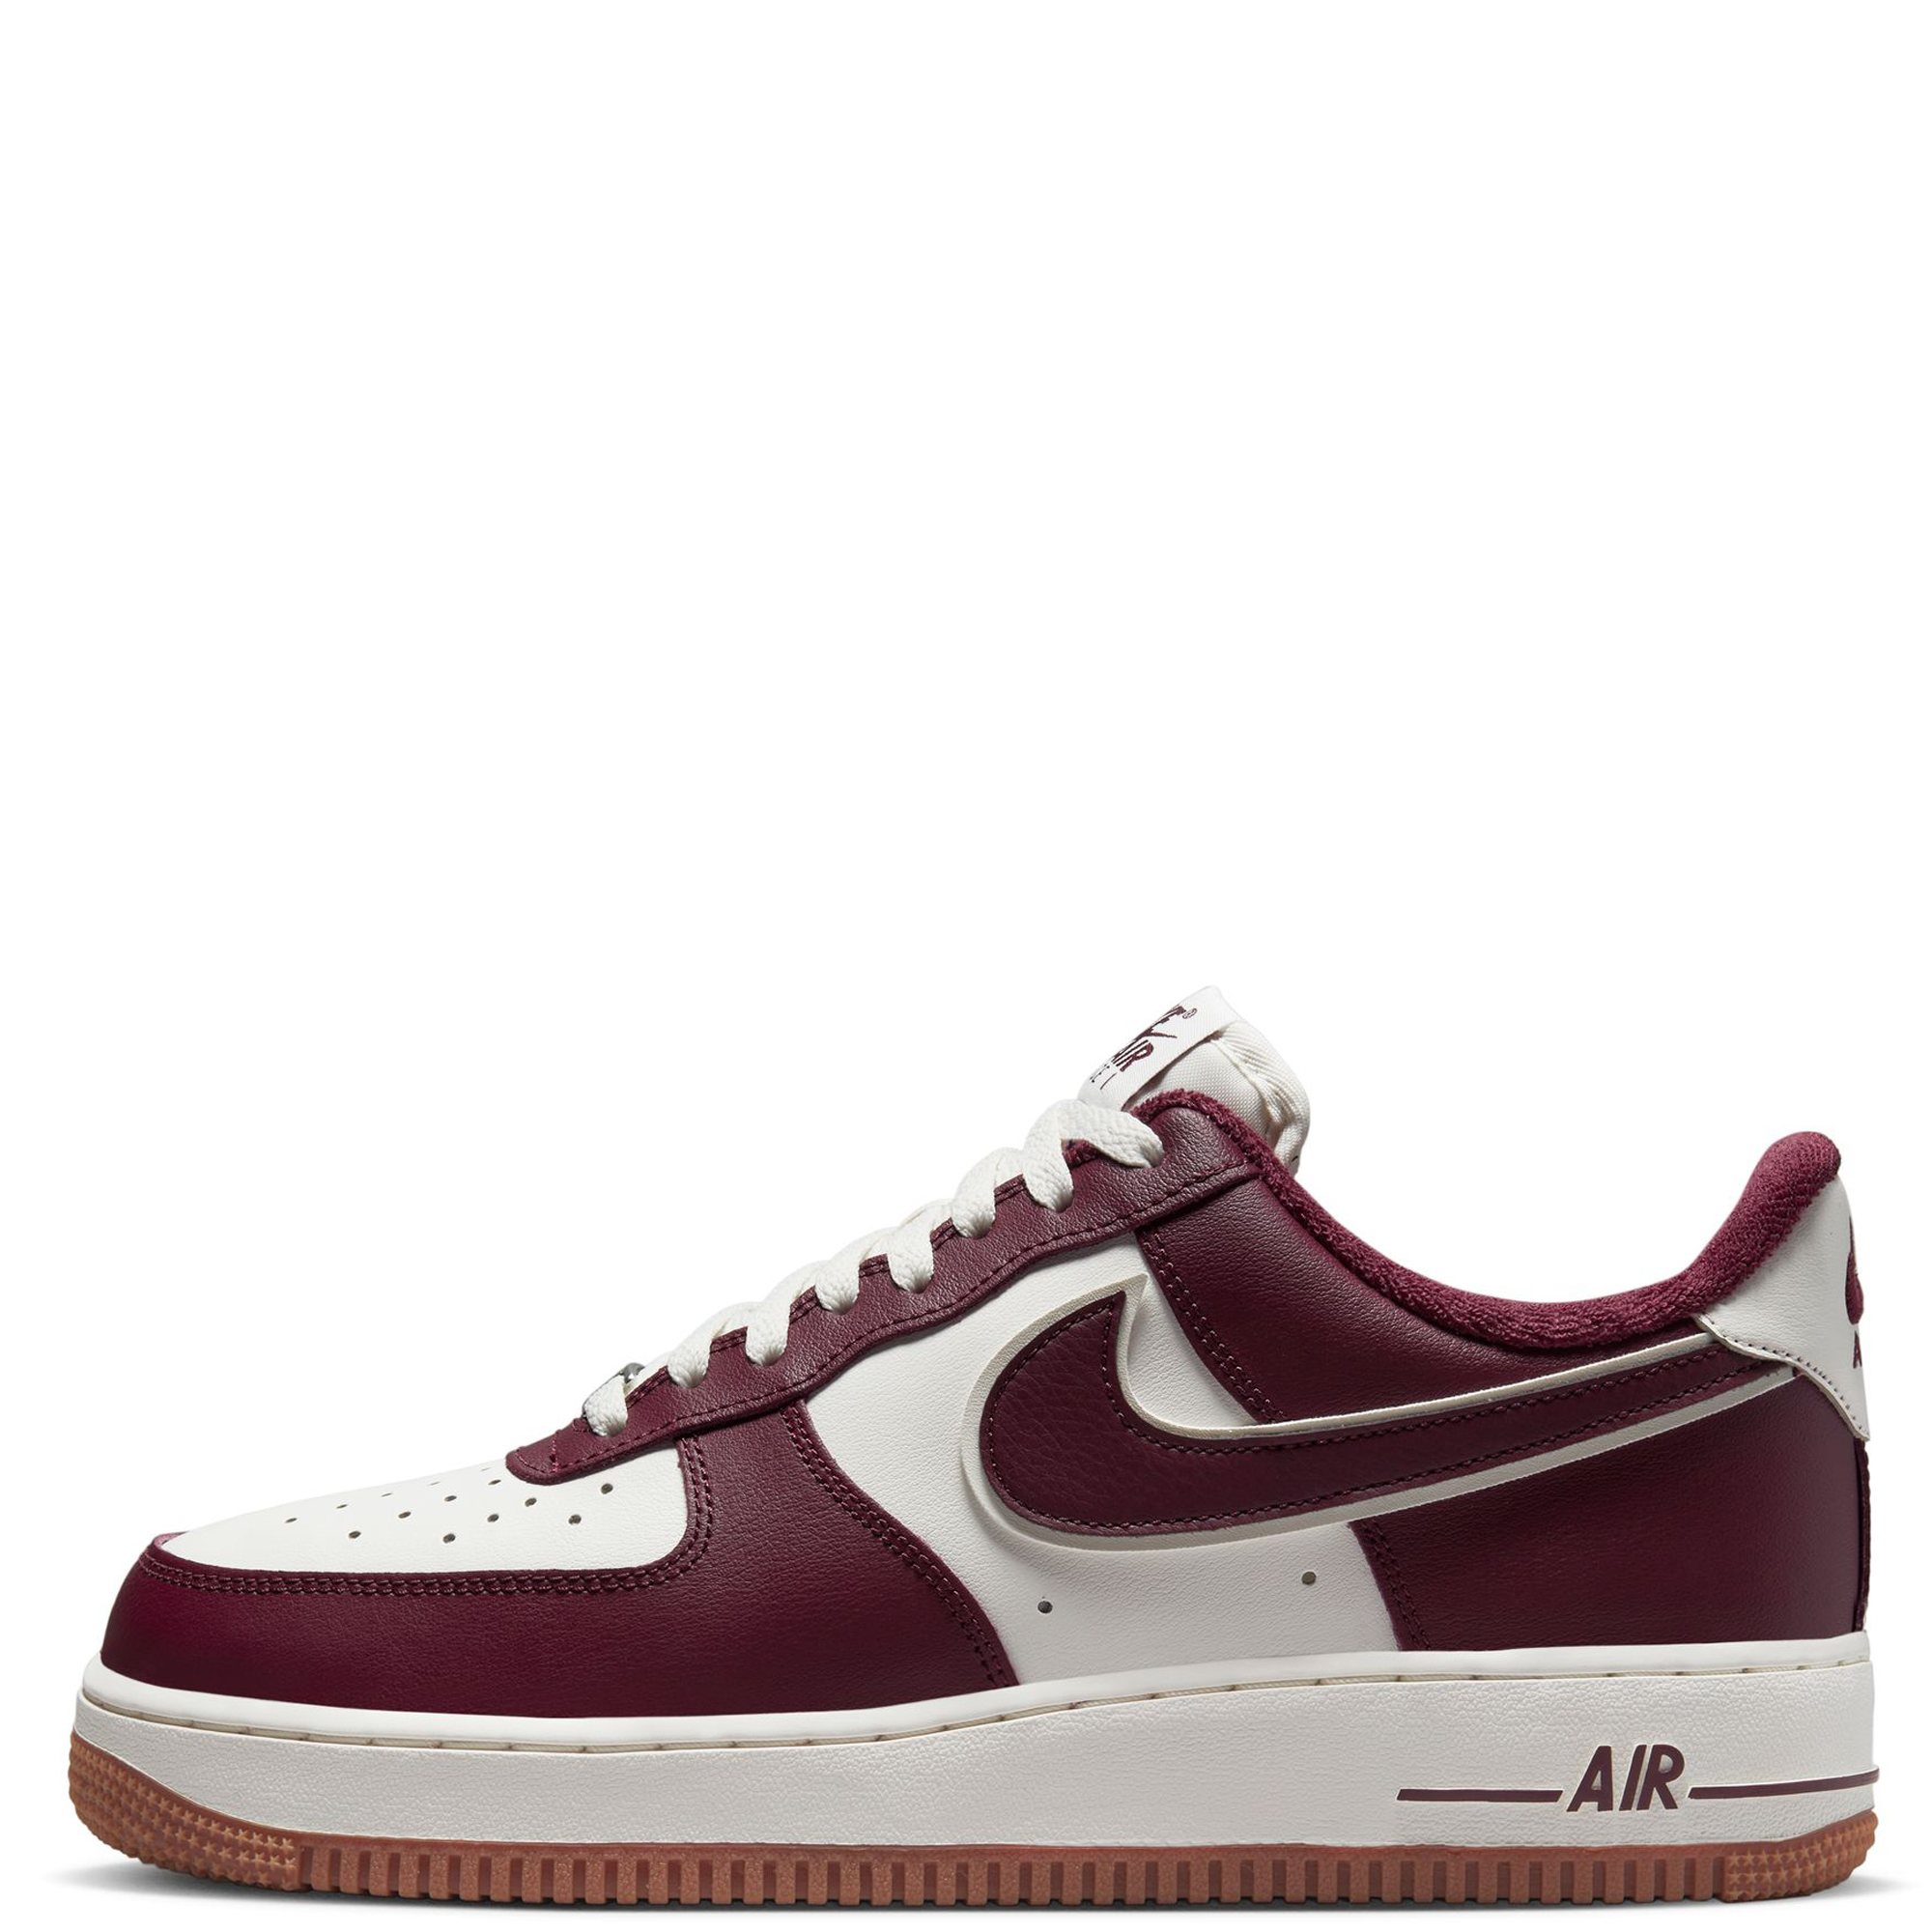 Nike Men's Air Force 1 '07 LV8 Shoes in White, Size: 5.5 | FJ5471-121